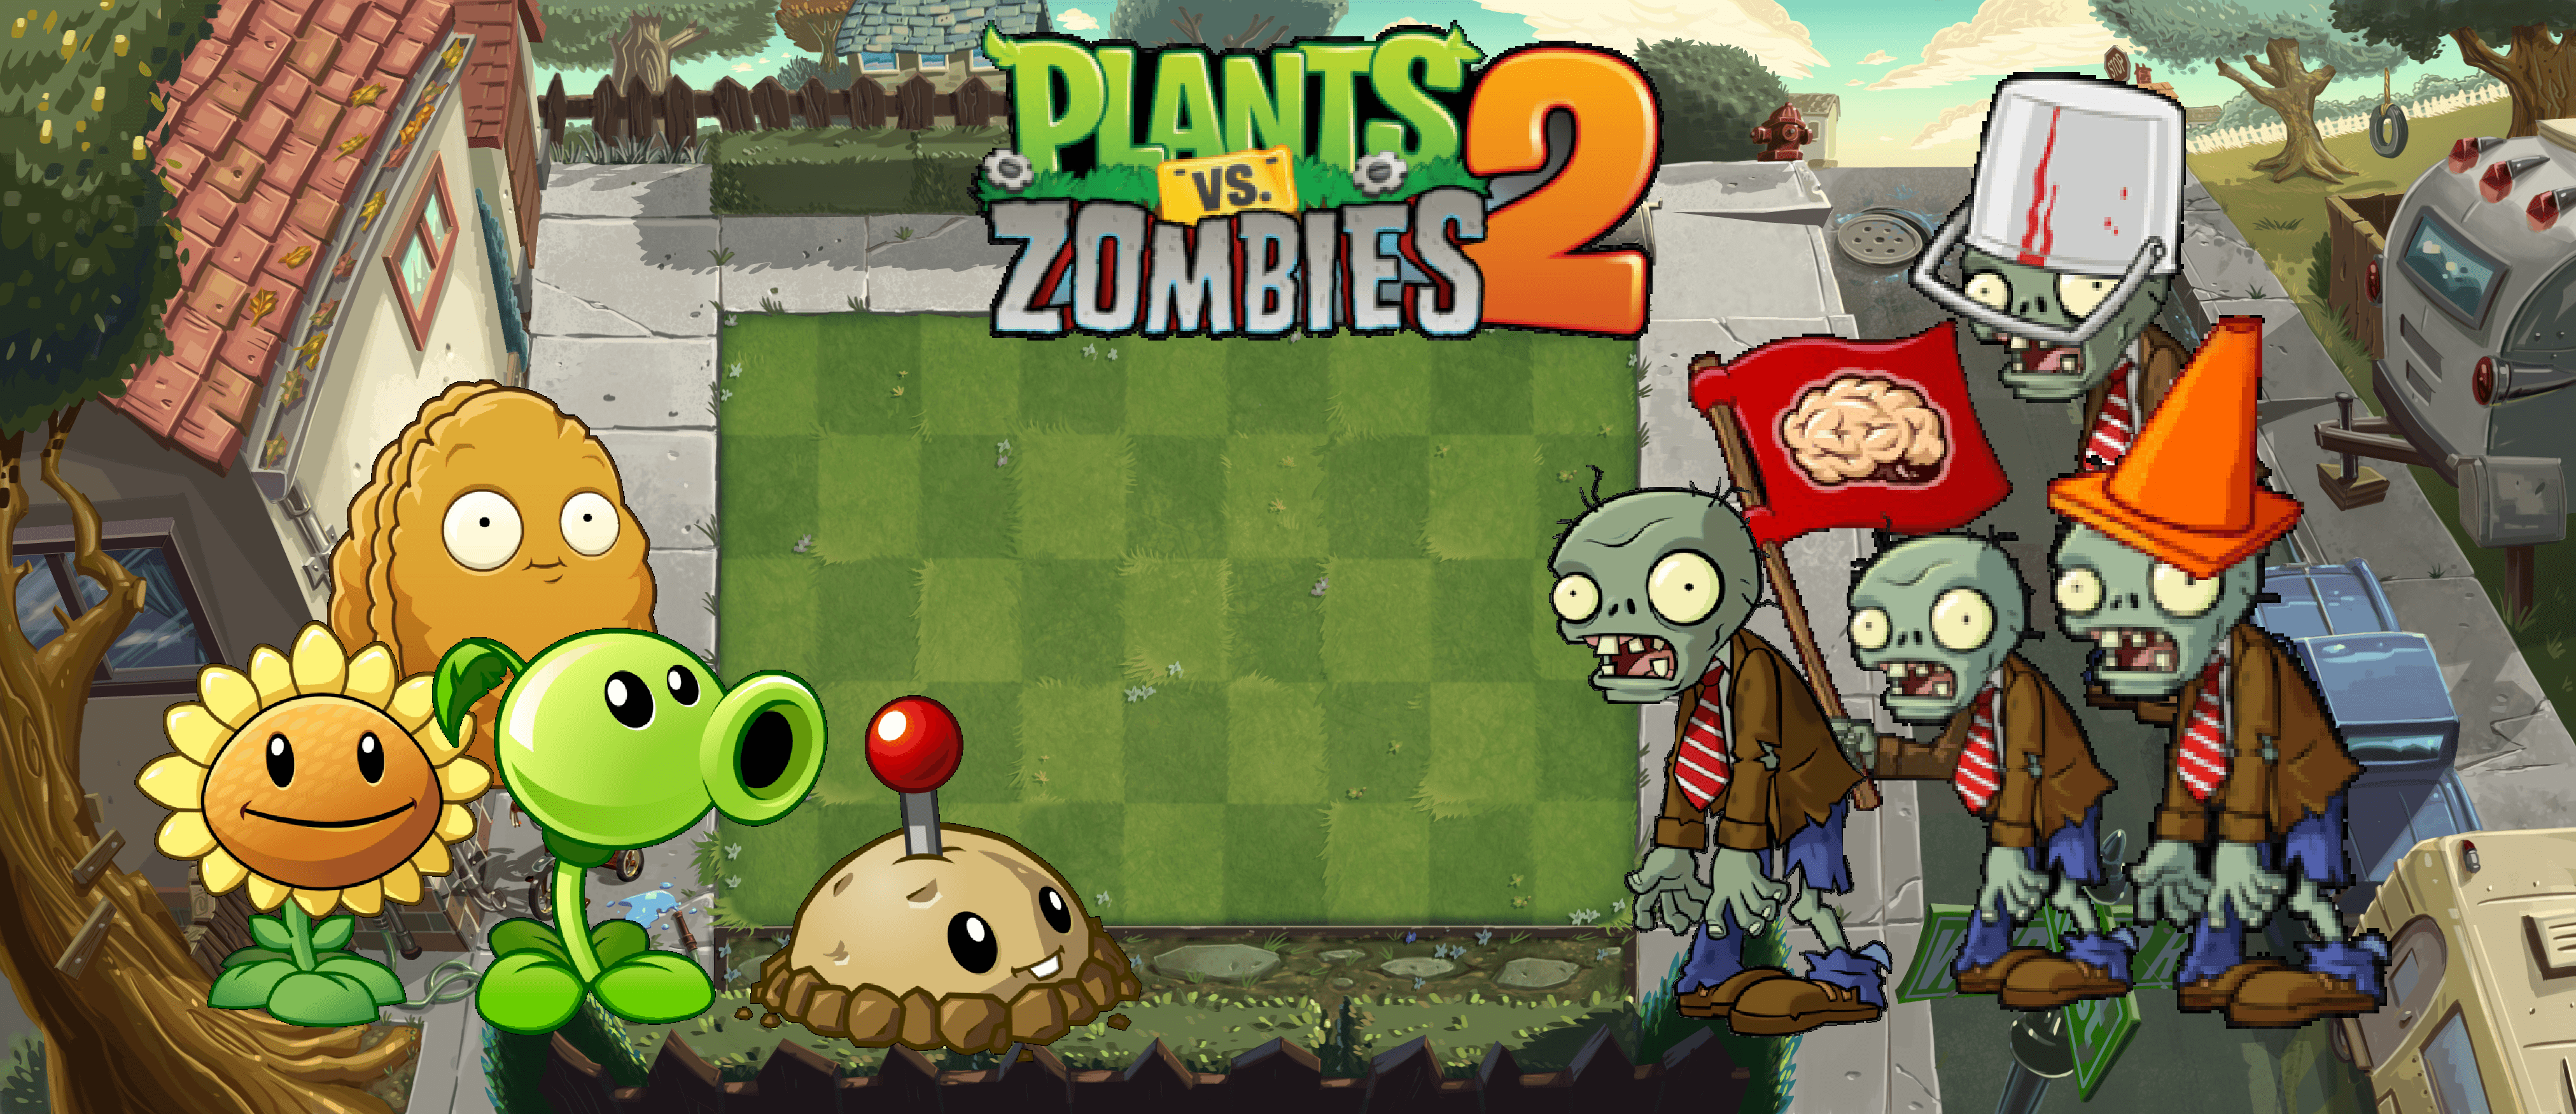 Plants vs Zombies 2 Player's House Wallpaper